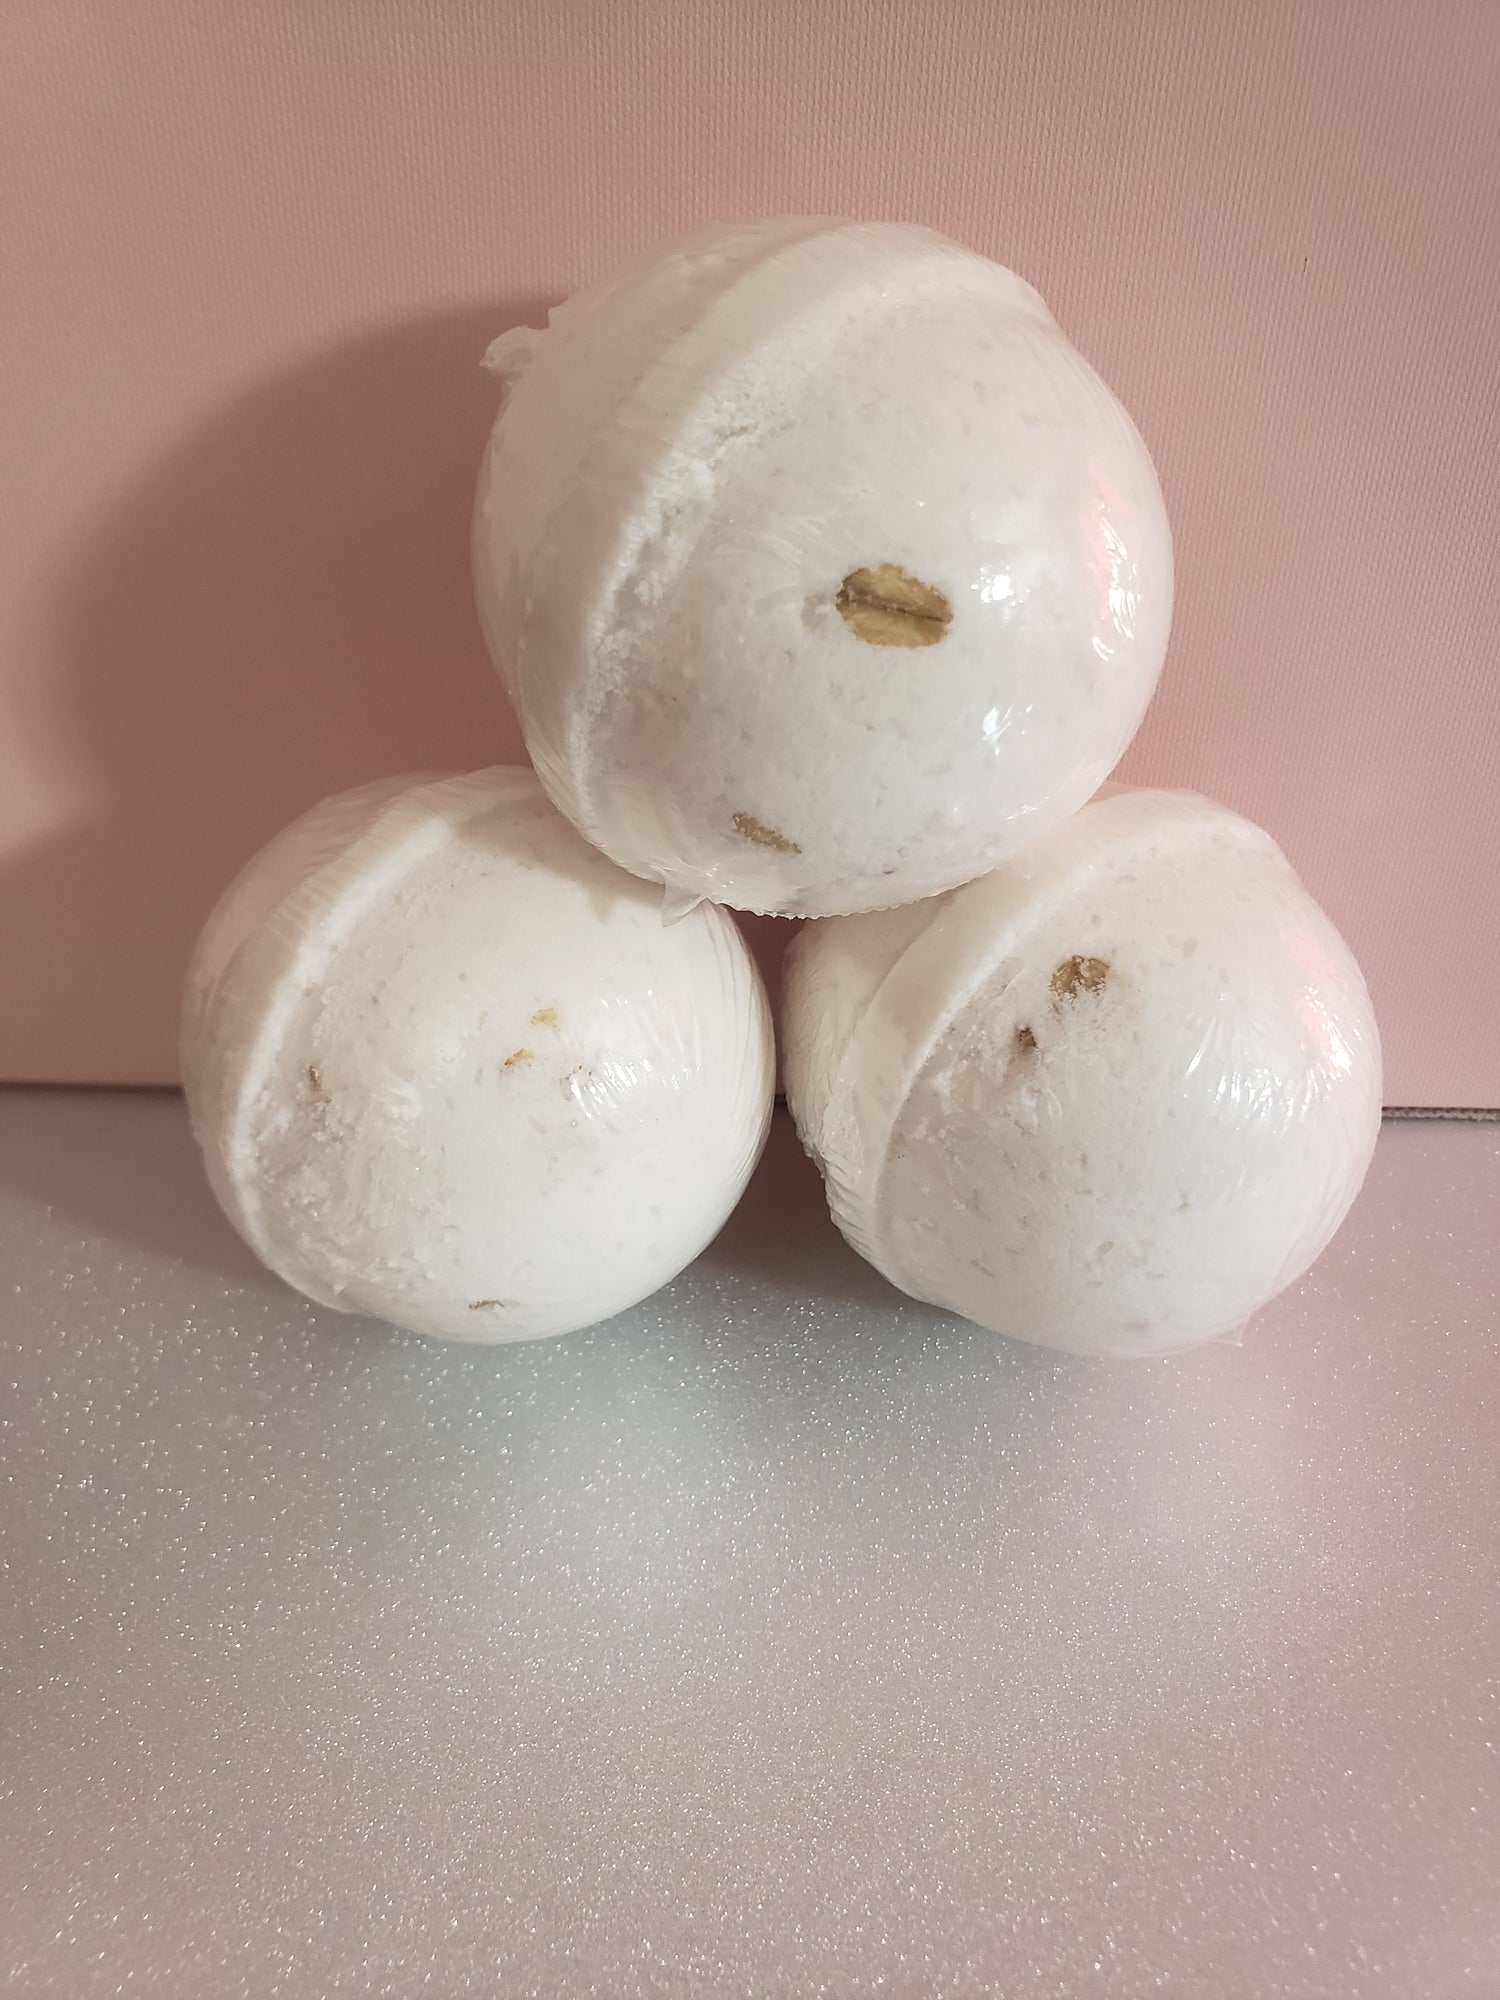 Bath bombs and Shower steamers